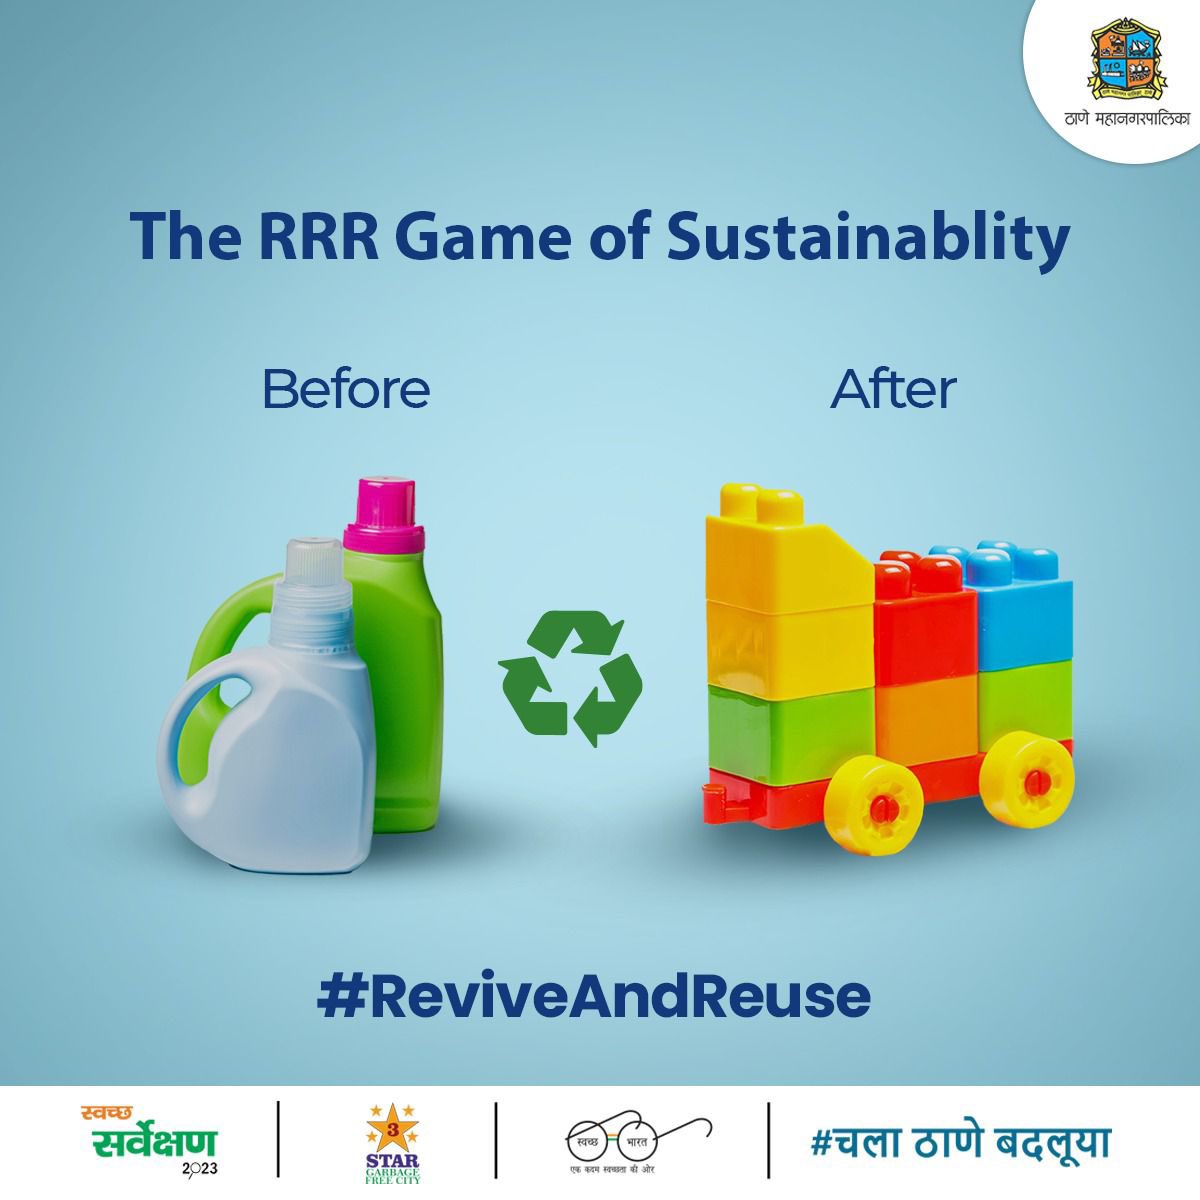 Play the game of sustainability and take a step towards a brighter future with #ReviveAndReuse for your old items✨🌱

#Thane #ThaneCity #thanecityofficial #thanekars #thanewest
#thanekar #HealthyLife #HealthyEnvironment #SwachhSurvekshan2023 #SwachhataKeDoRang #MyCityMyPride